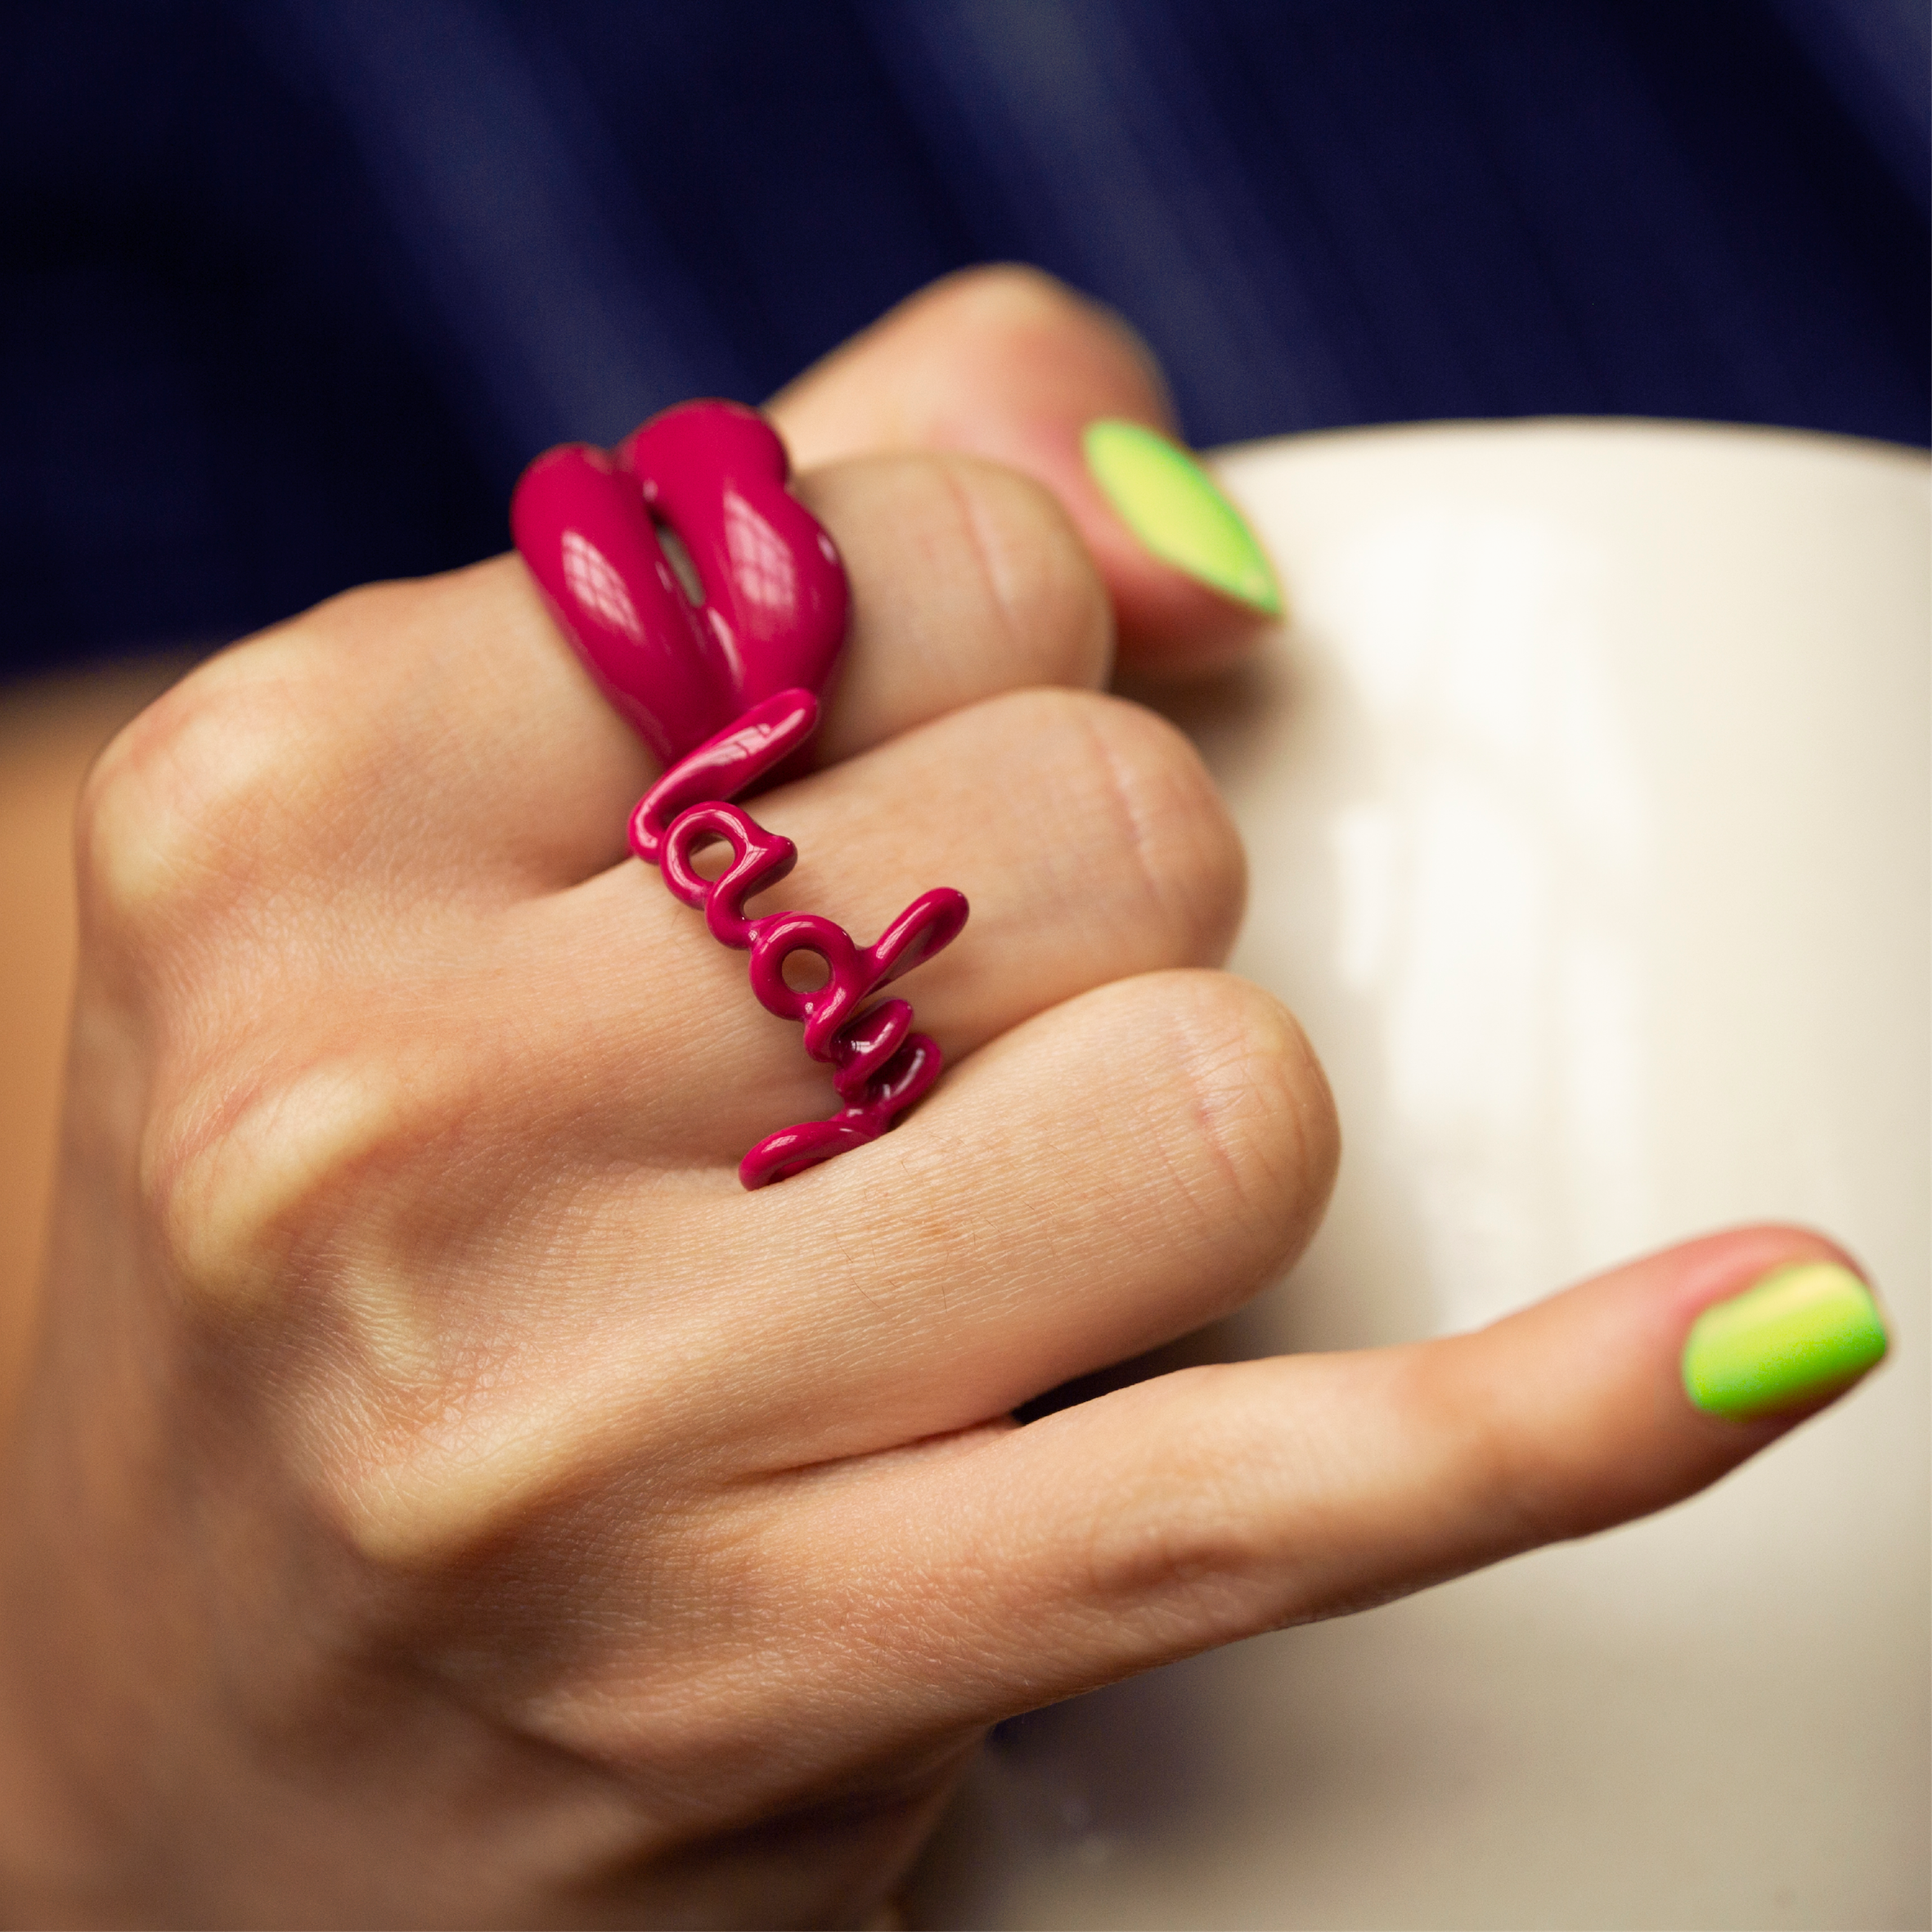 Lady pink enamel Hotscript word ring with dusky pink Hotlips ring on hand with upturned pinky